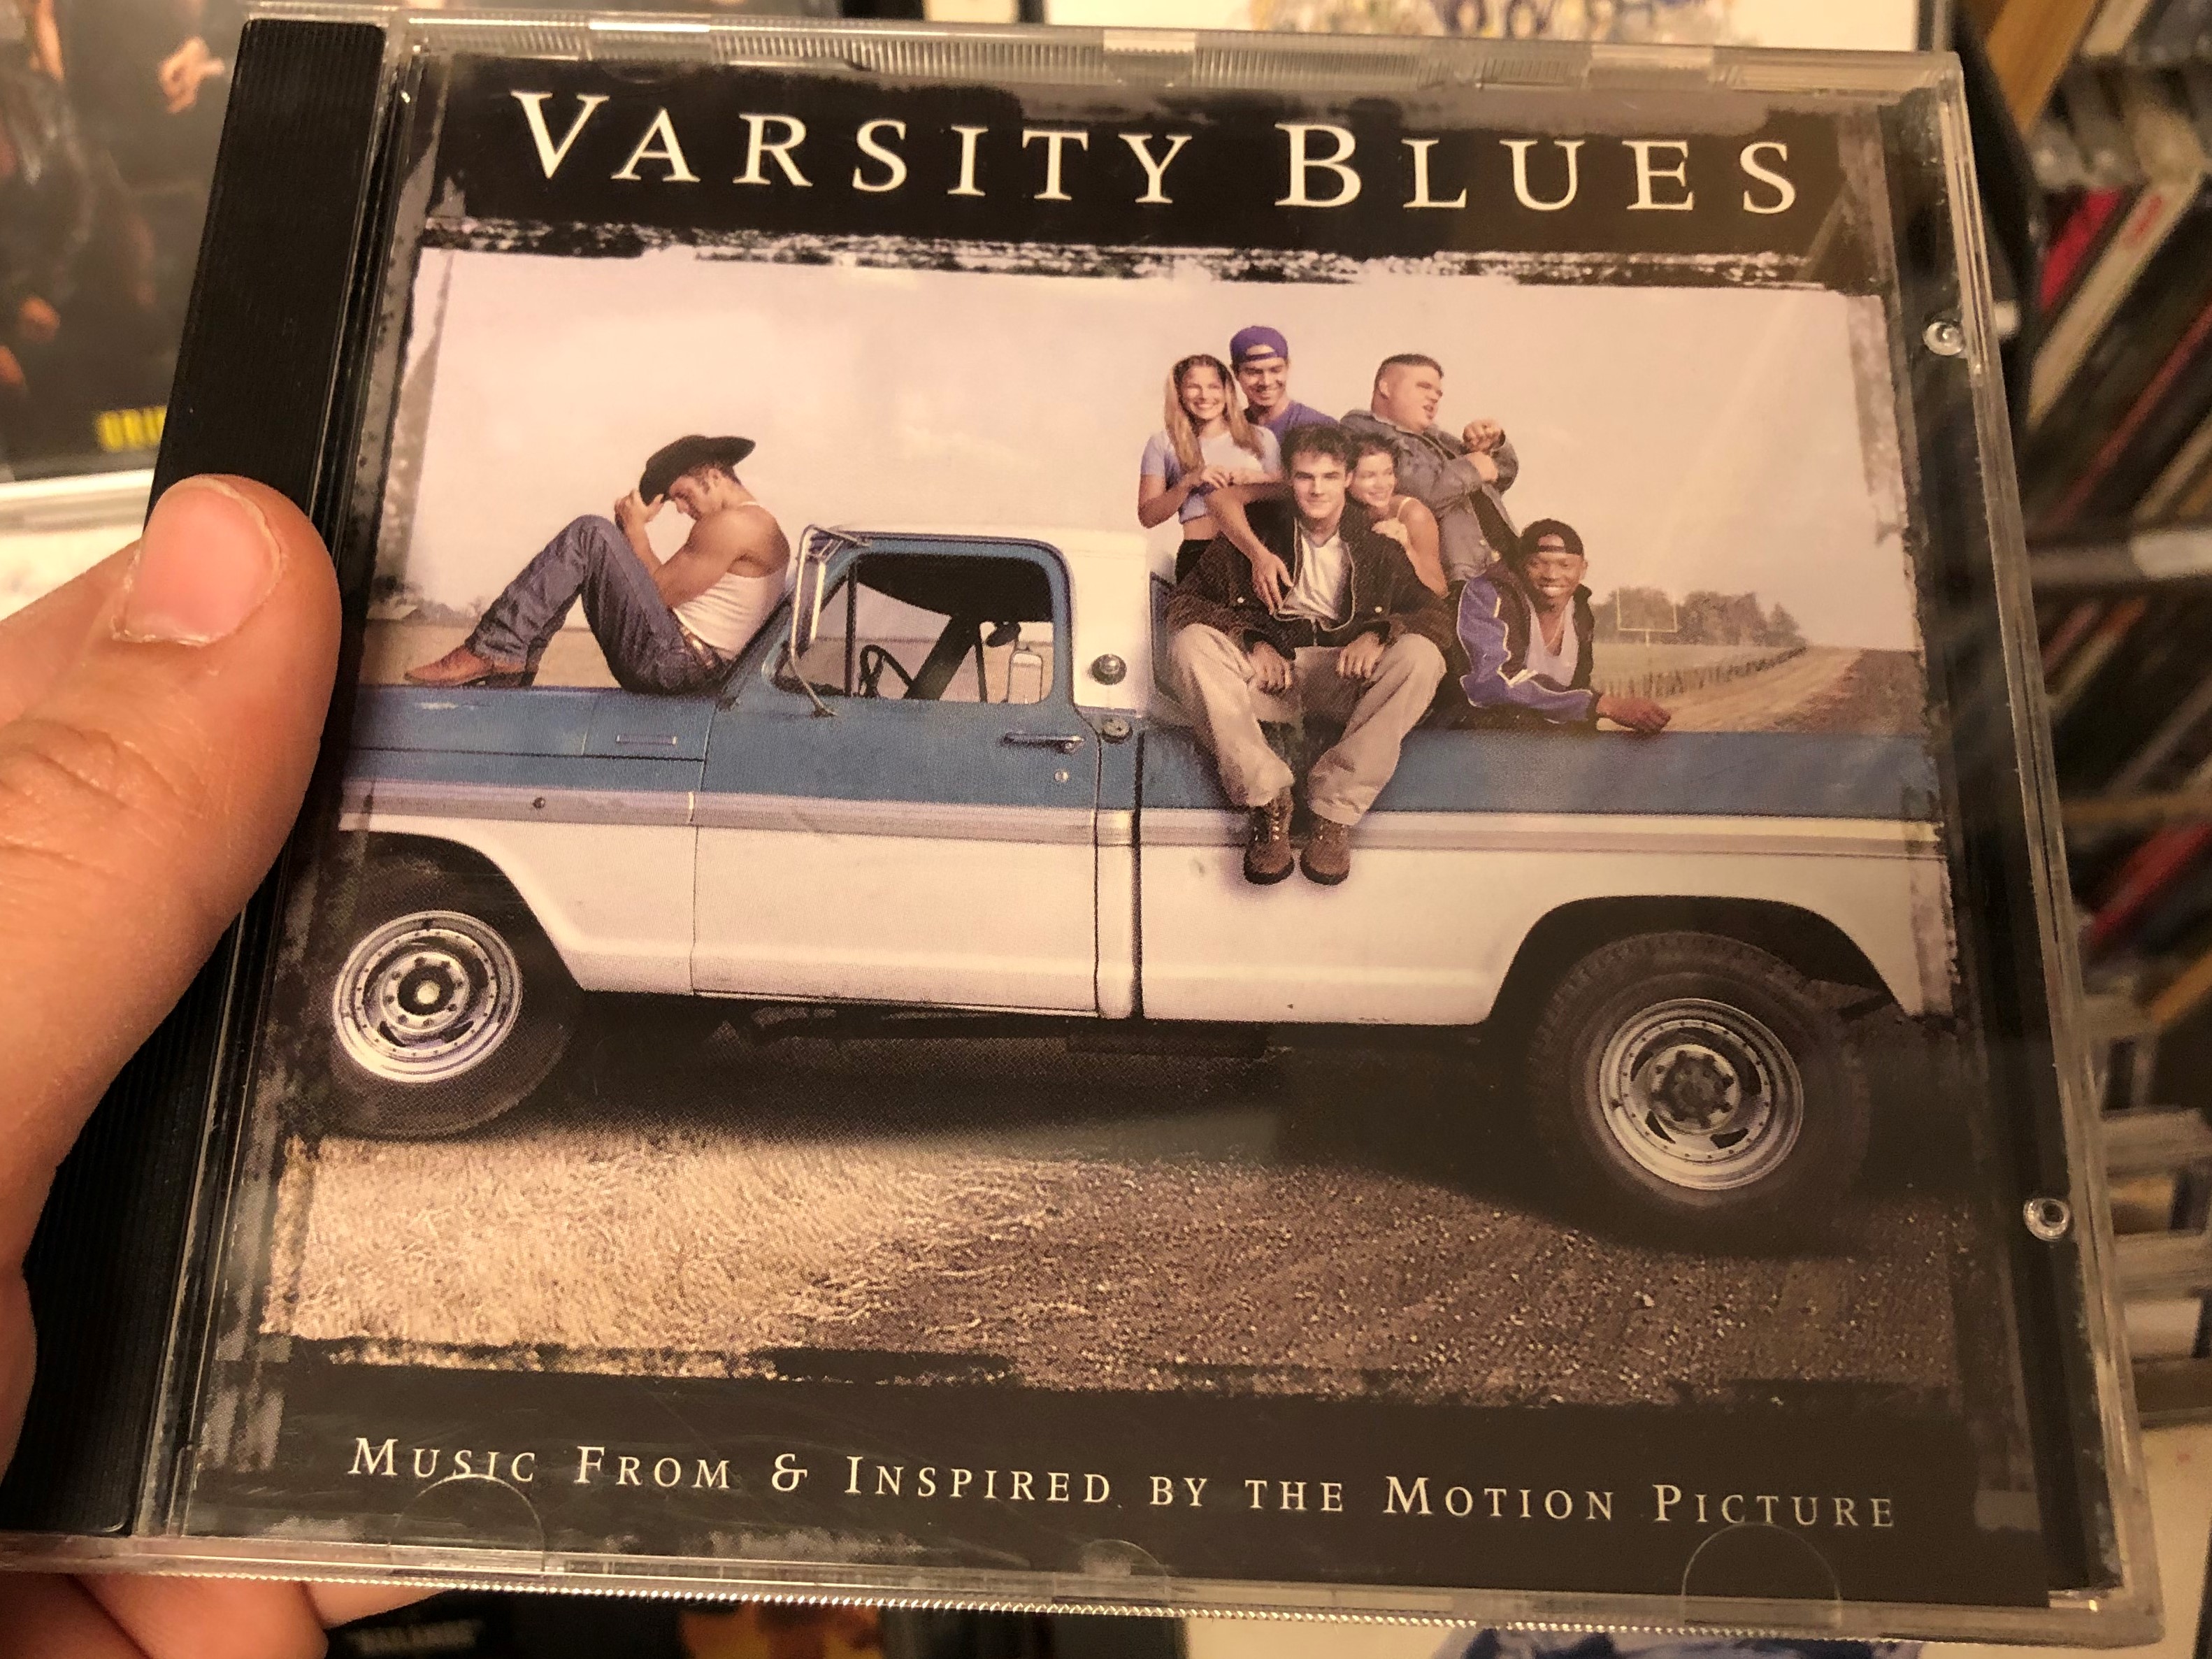 varsity-blues-music-from-inspired-by-the-motion-picture-hollywood-records-audio-cd-1998-0102052hwr-1-.jpg